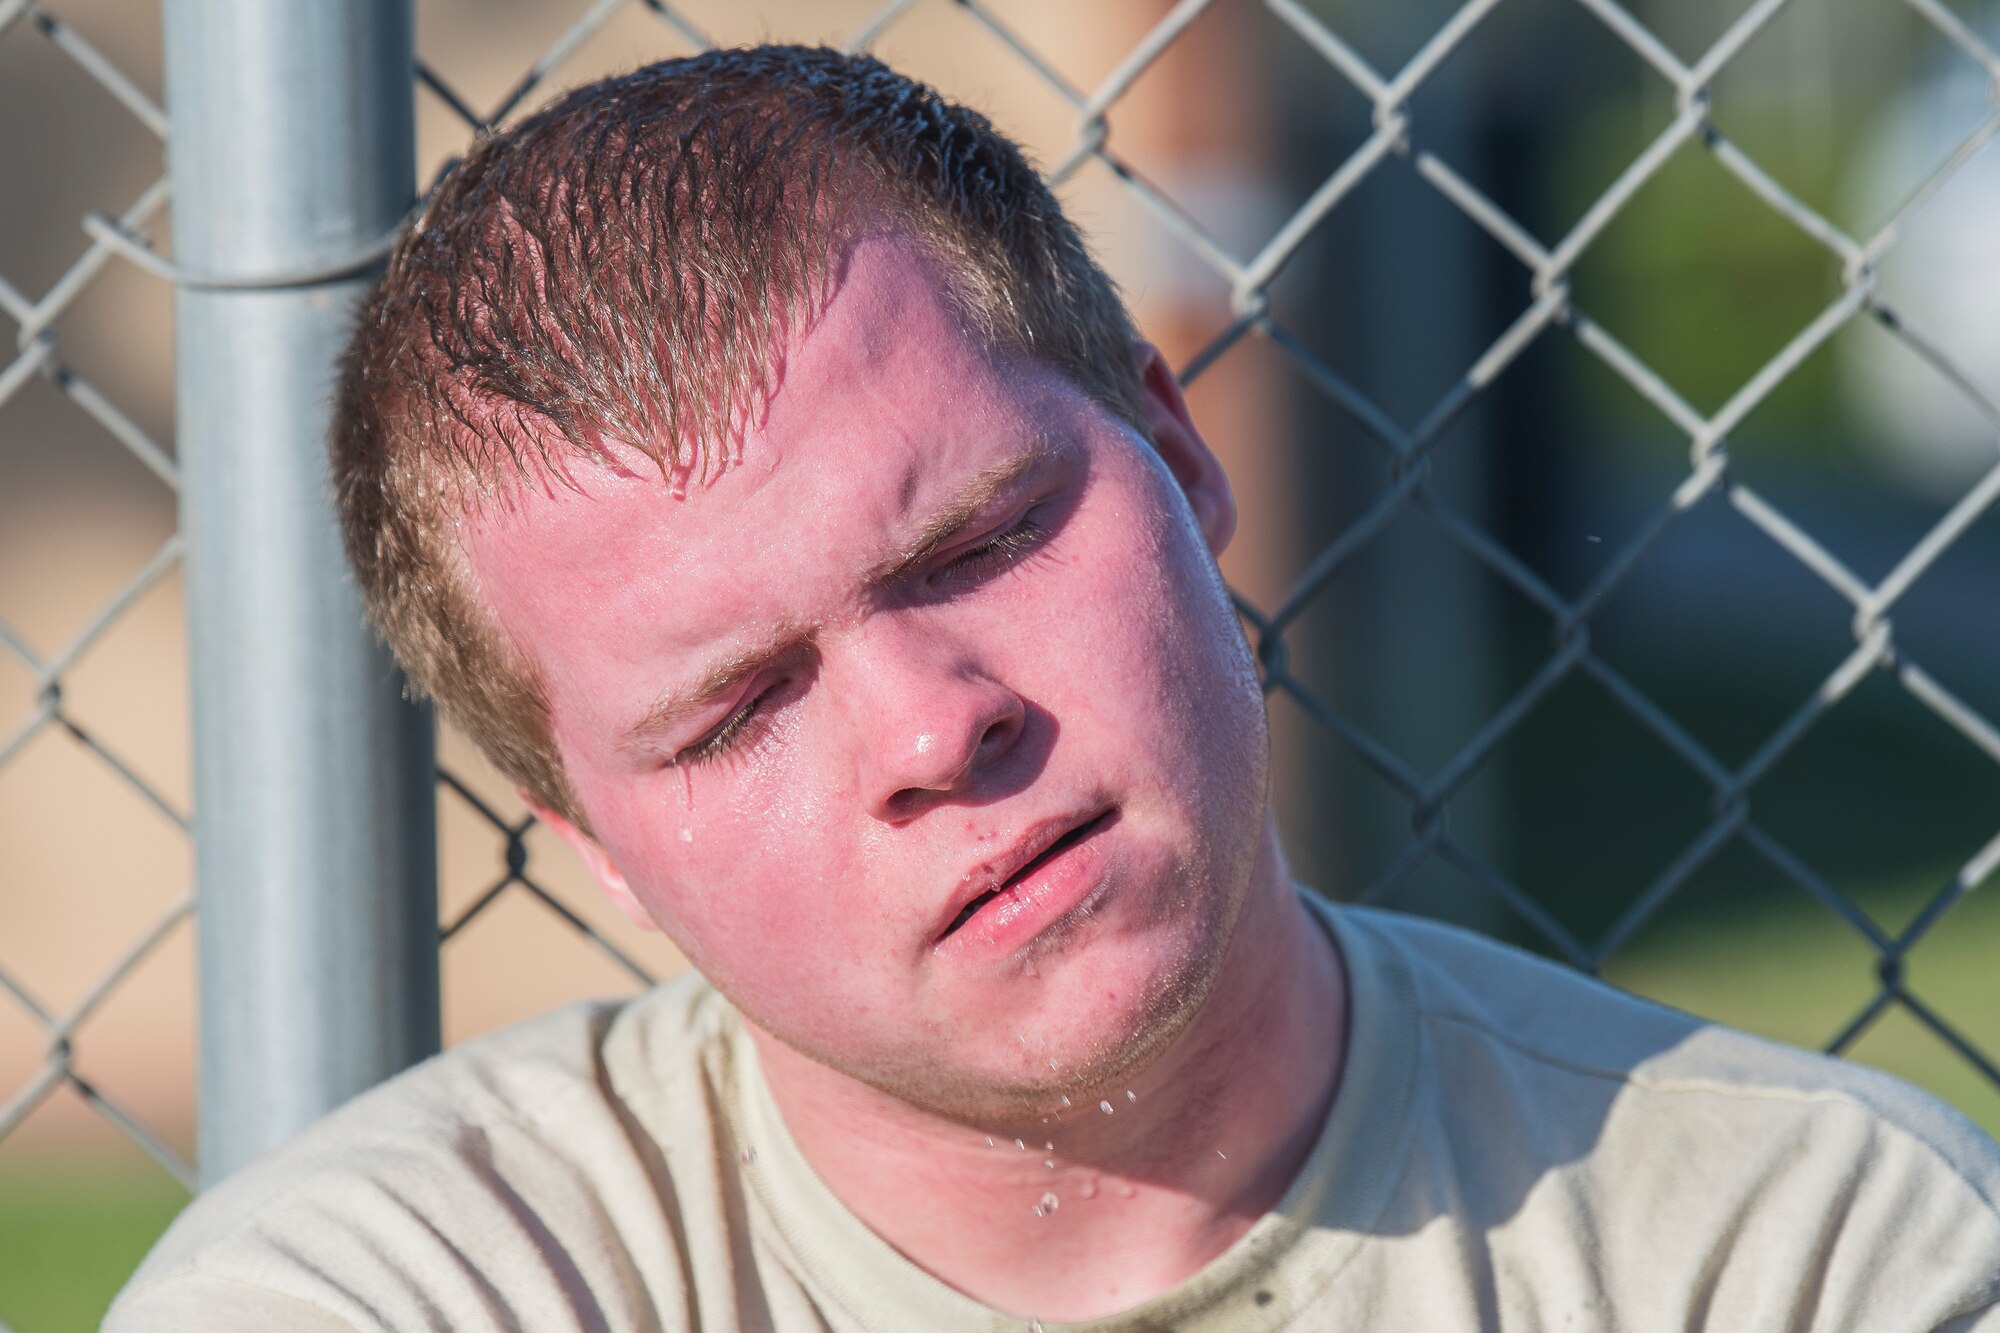 Airman 1st Class Kyle Fabrizius, 27th Special Operations Logistics Readiness Squadron fuels distribution technician, rests after his attempt of the Forward Air Refueling Point tryouts at Cannon Air Force Base, N.M., October 9, 2019. FARP tryouts are held when the team requires a new member but allow other career fields to attempt the challenge. (U.S. Air Force photo by Senior Airman Vernon R. Walter III)